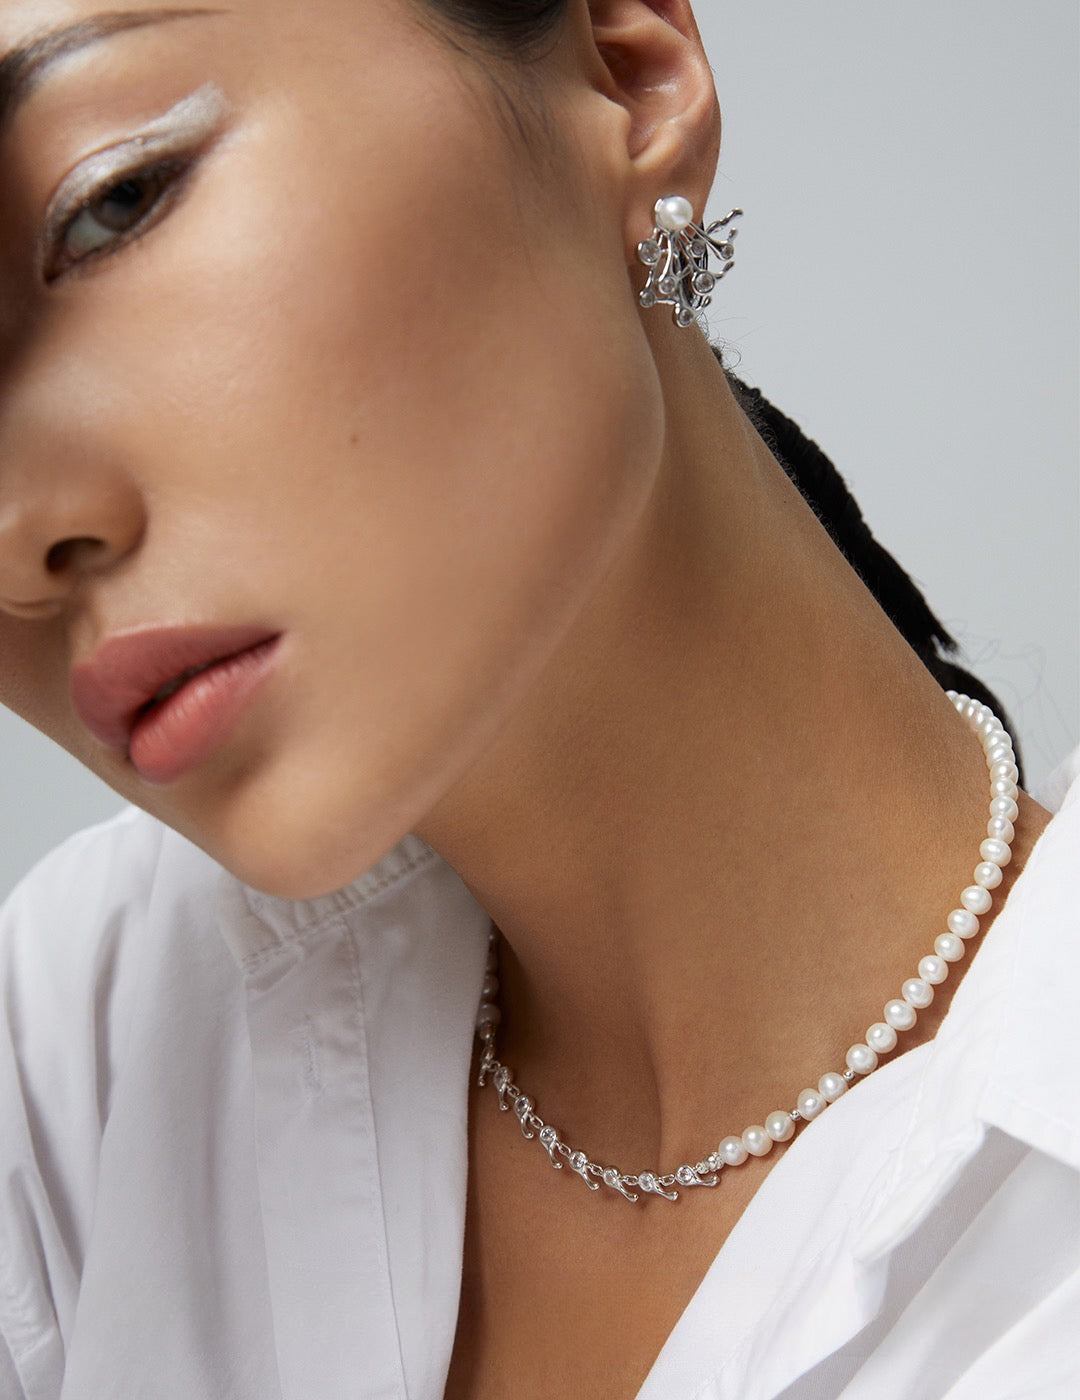 Pearlescent Opulence Shimmer Necklace, a true embodiment of elegance - Delight in its iridescent glow, oozing sophistication - Elevate your style and radiate charm effortlessly -  S925 Sterling Silver with 18K Gold Vermeil - Pearl Luminance  - The epitome of elegance and luxury